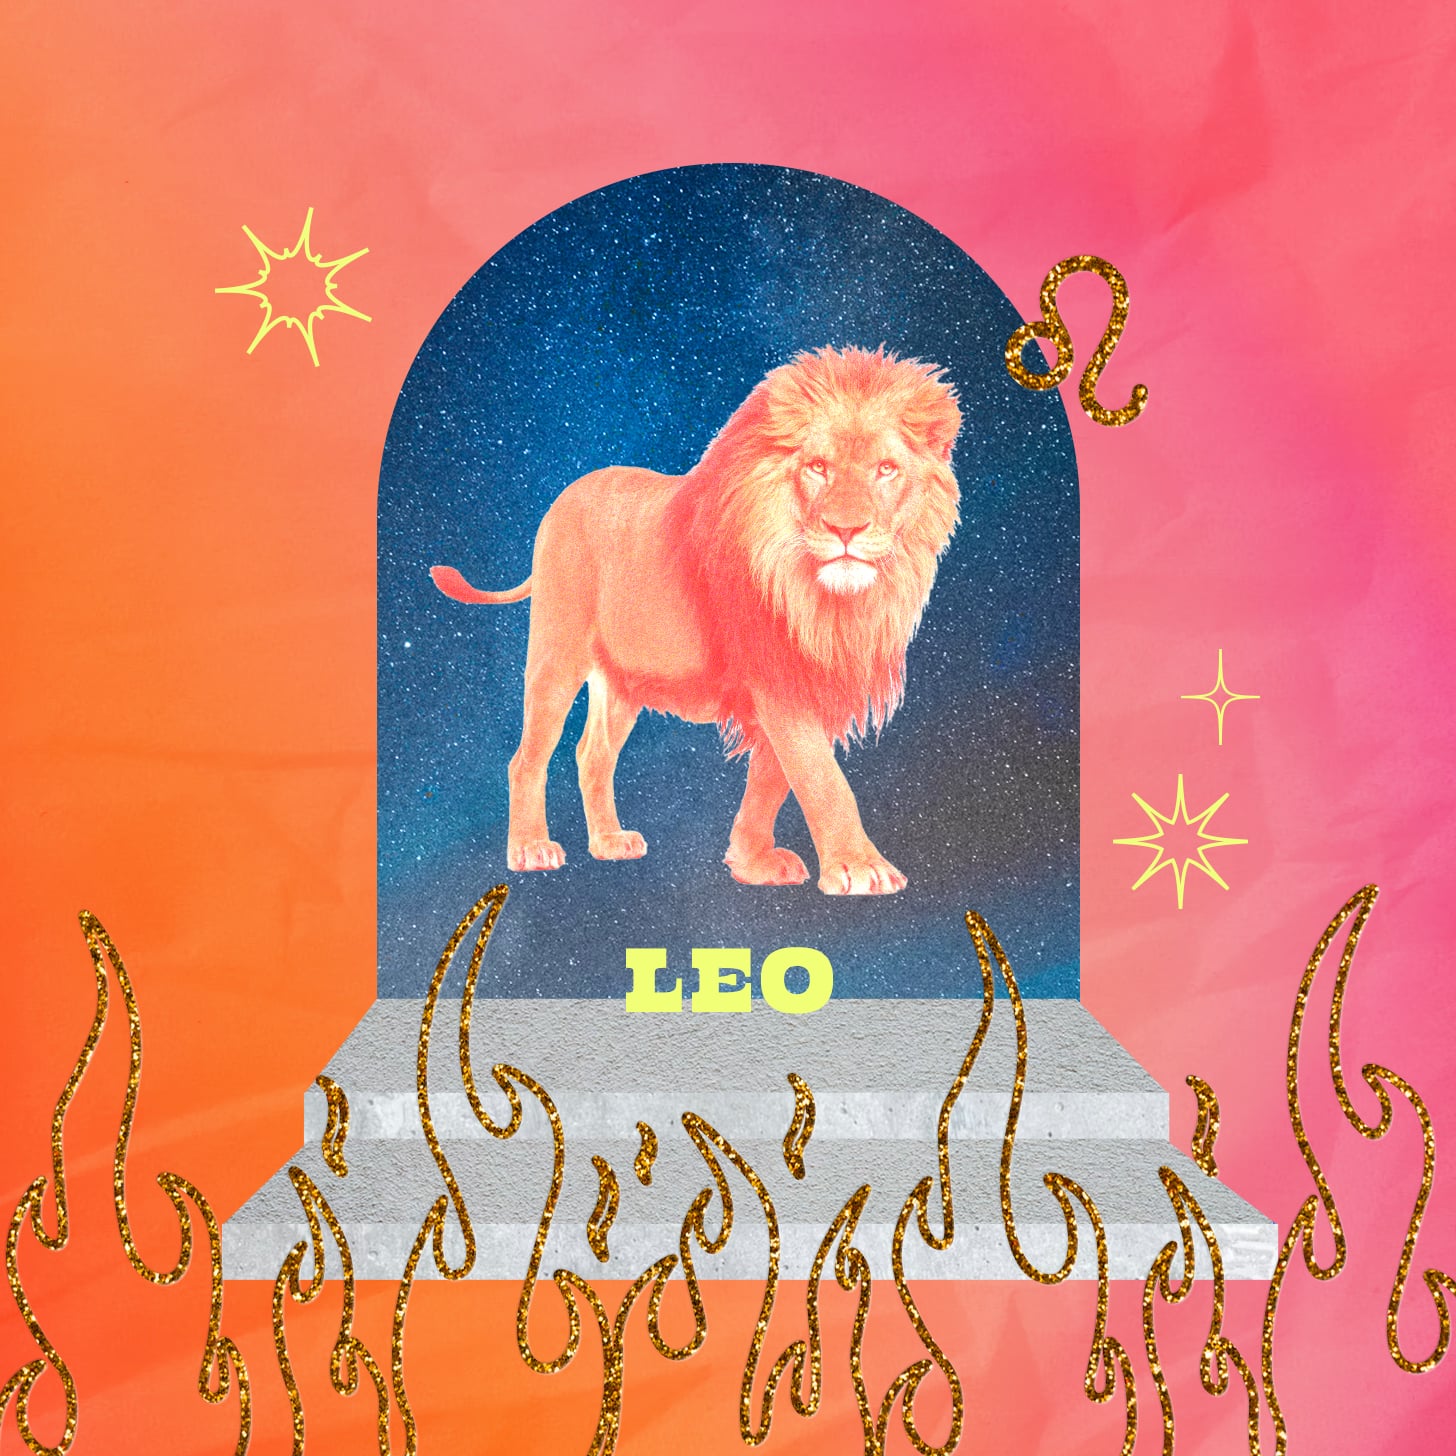 Leo weekly horoscope for week of October 23, 2022